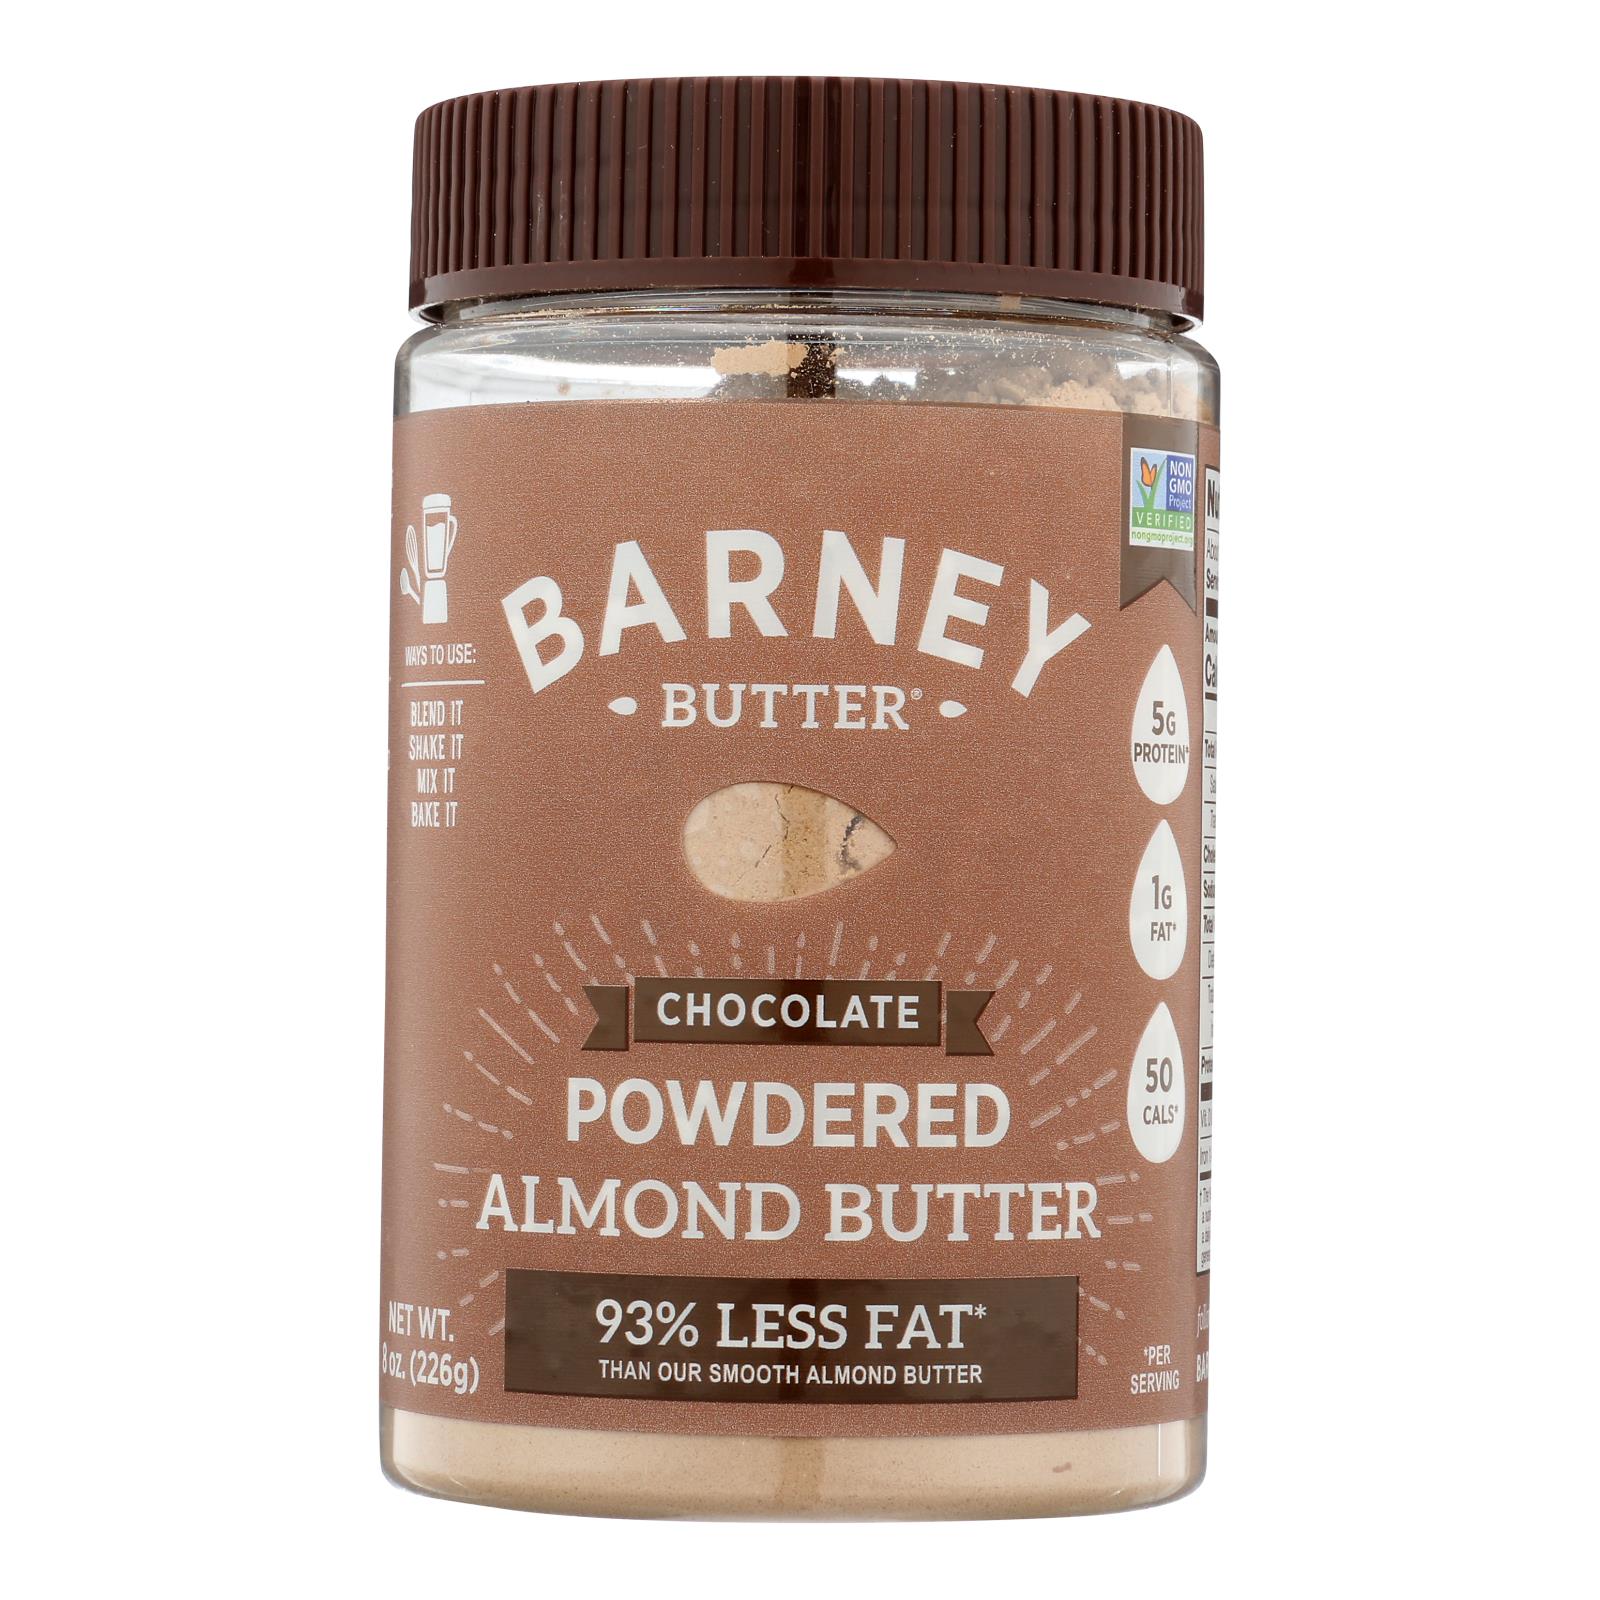 Barney Butter - Pwdrd Almond Butter Chocolate - Case of 6 - 8 OZ